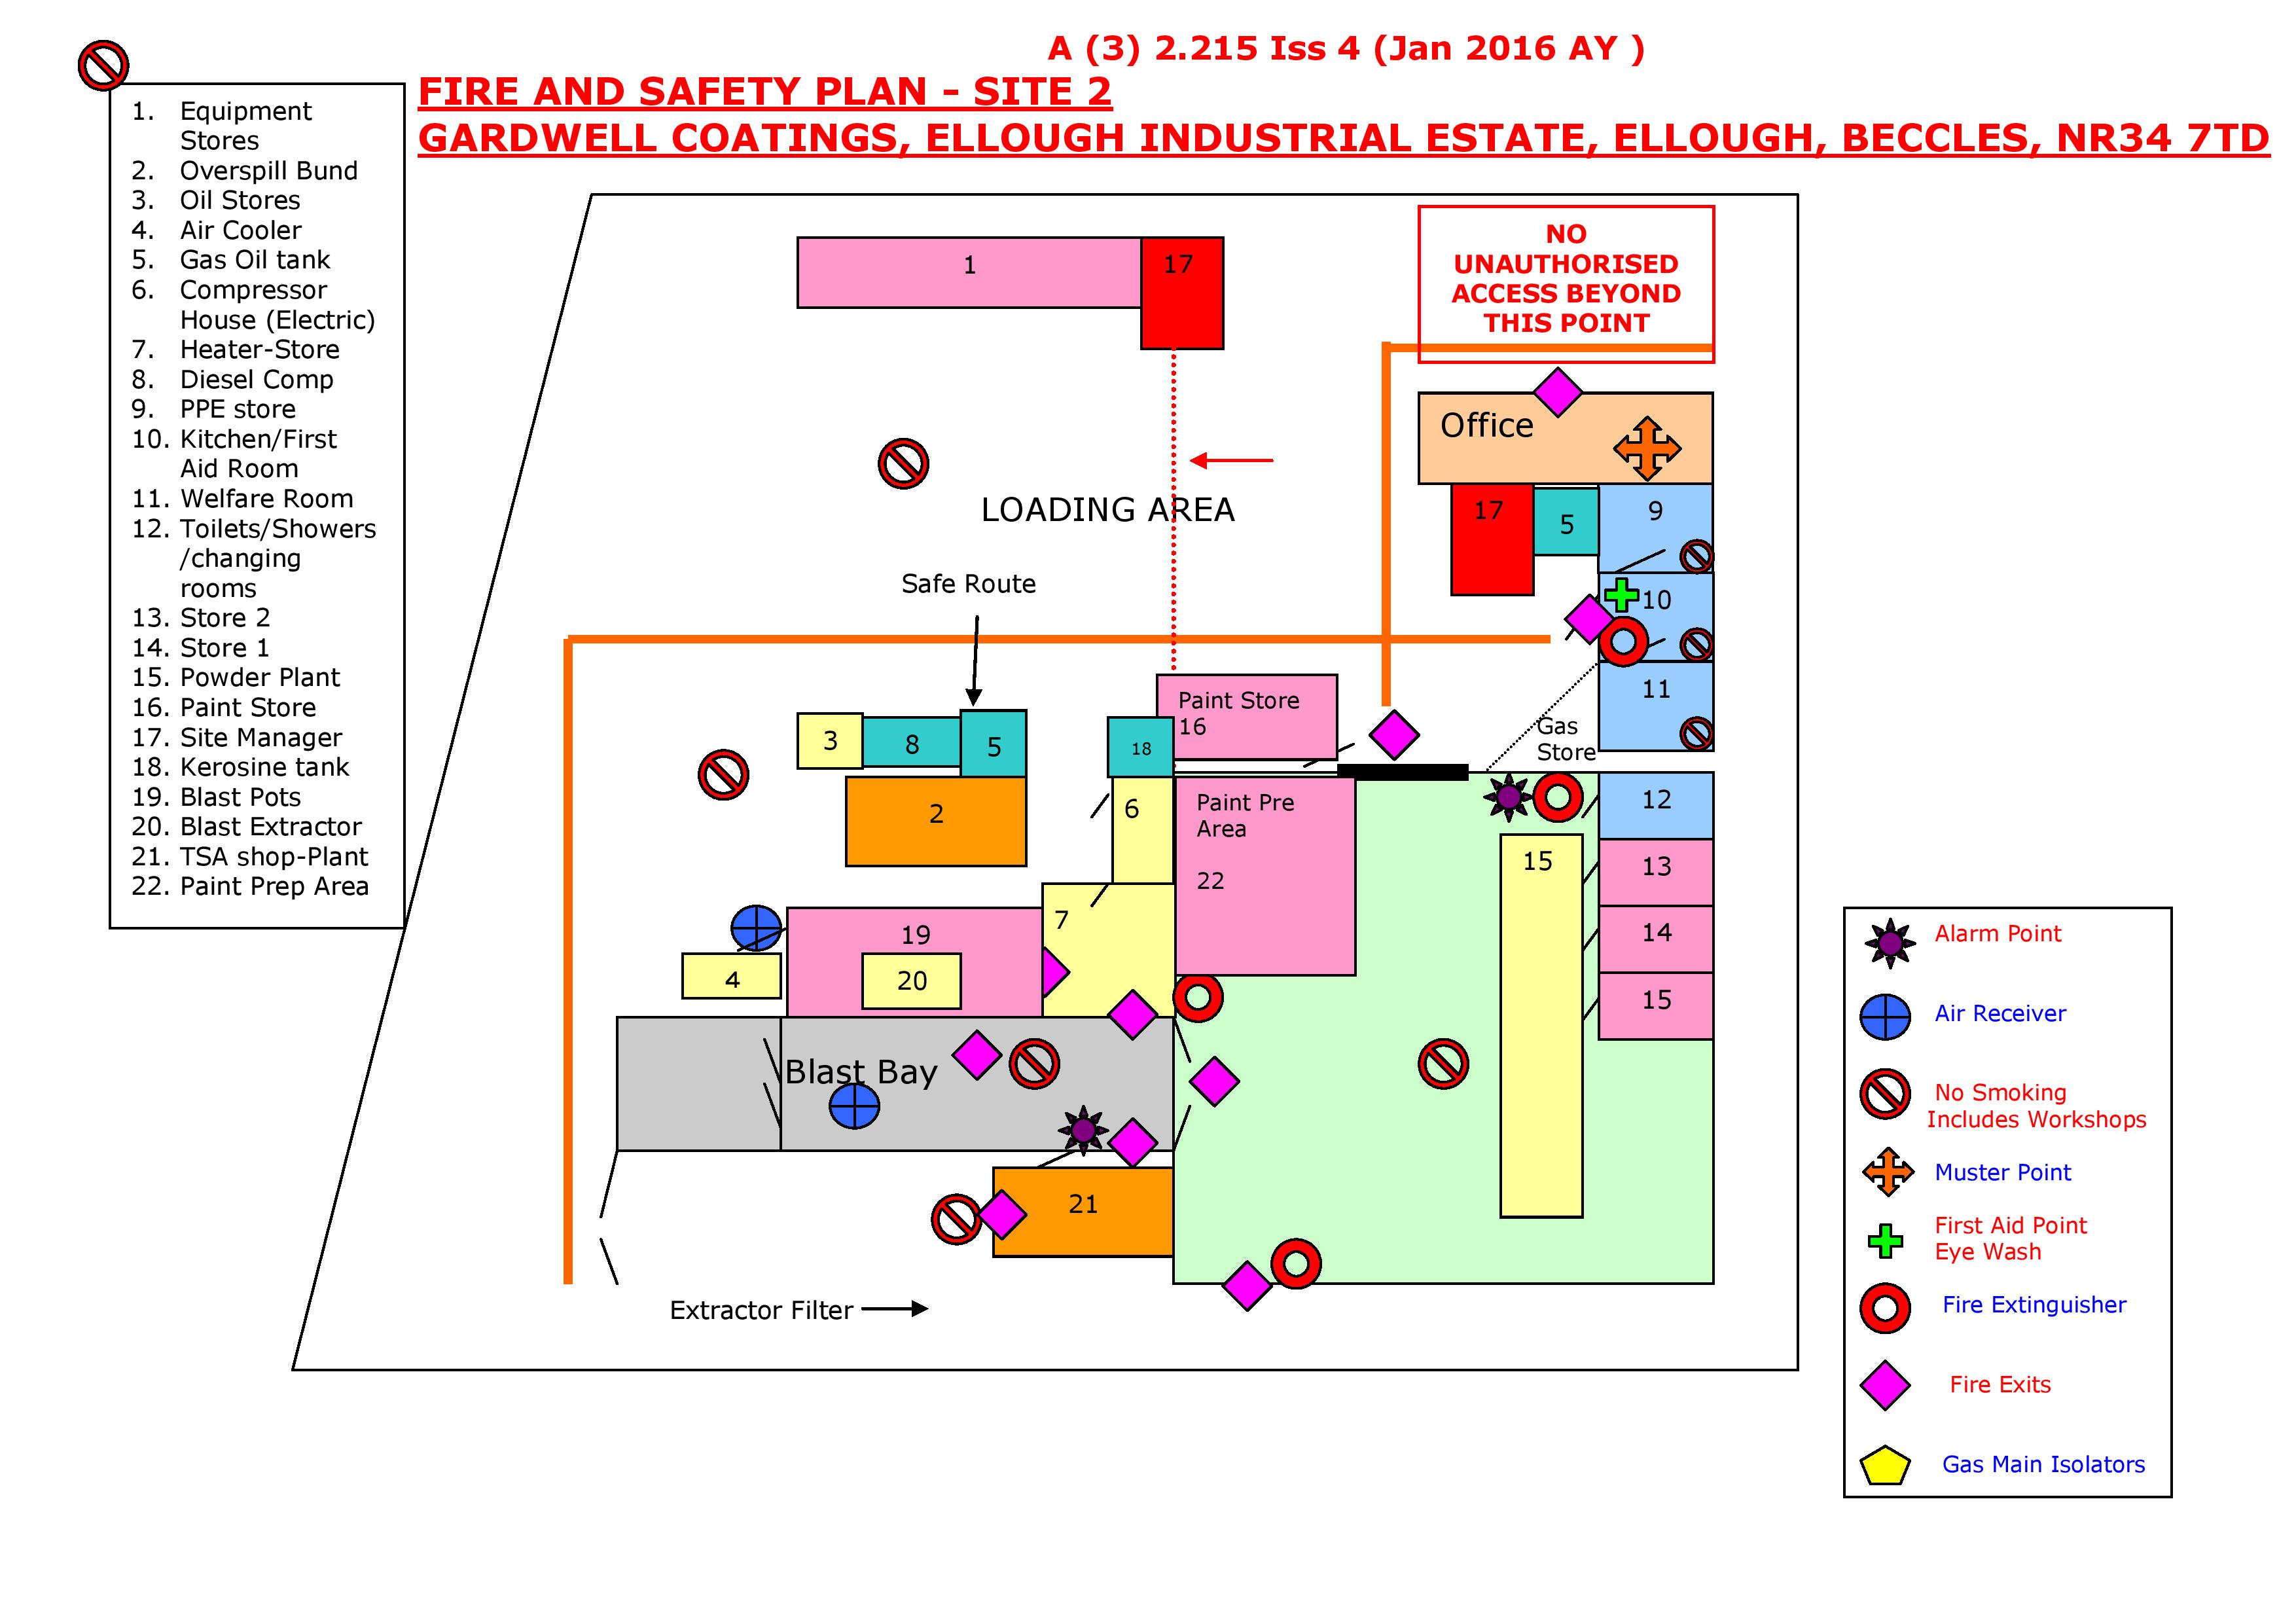 A (3) 2.215 - Fire and Safety Plan Site 2 airoblast issue 4 jan 16-page-001